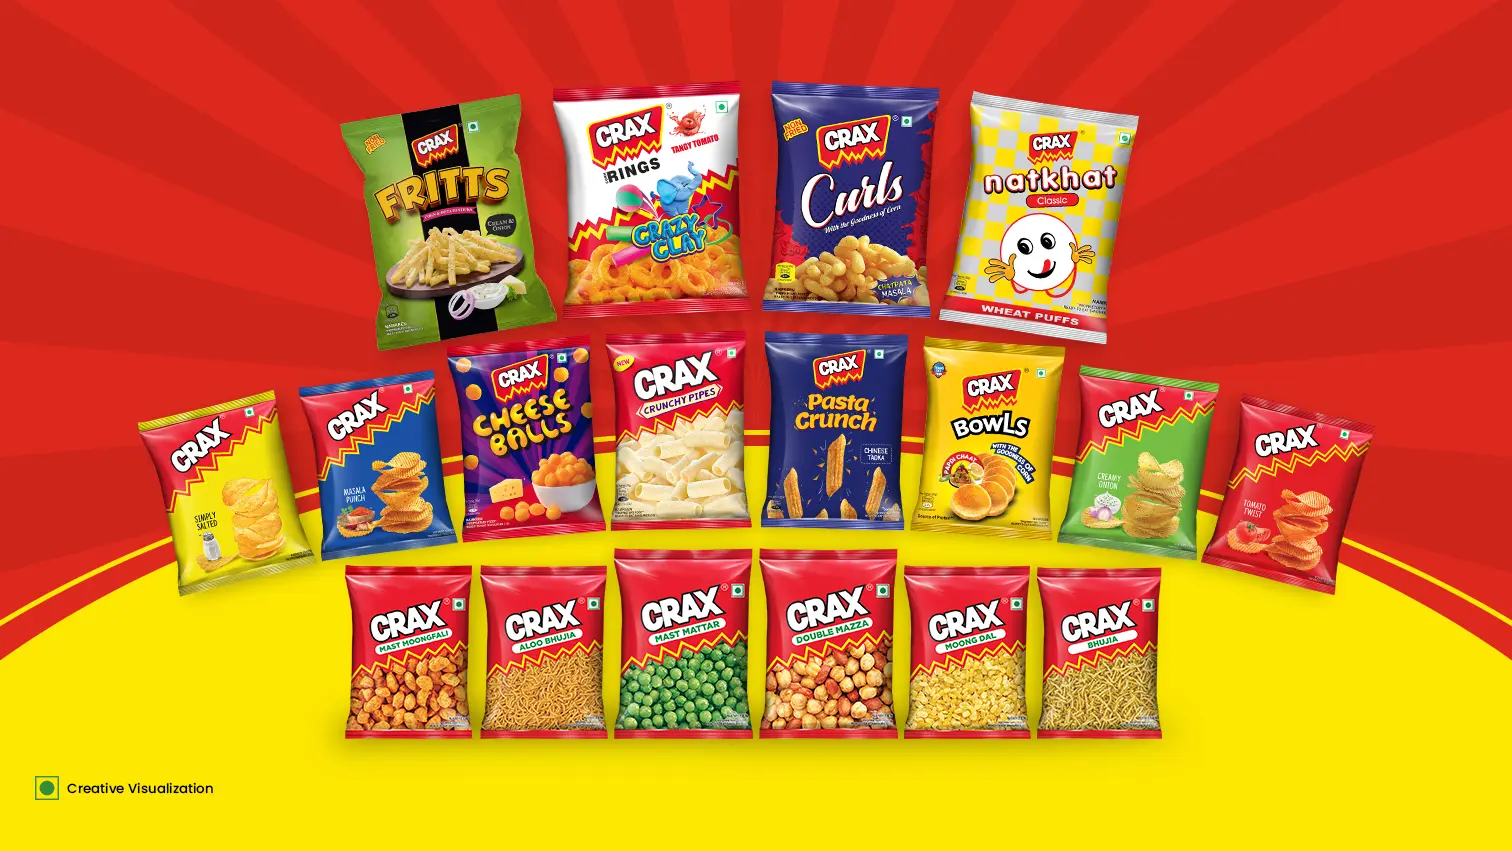 Crax Masala Mania Corn Rings Crisps - Pack of 3 Price - Buy Online at Best  Price in India